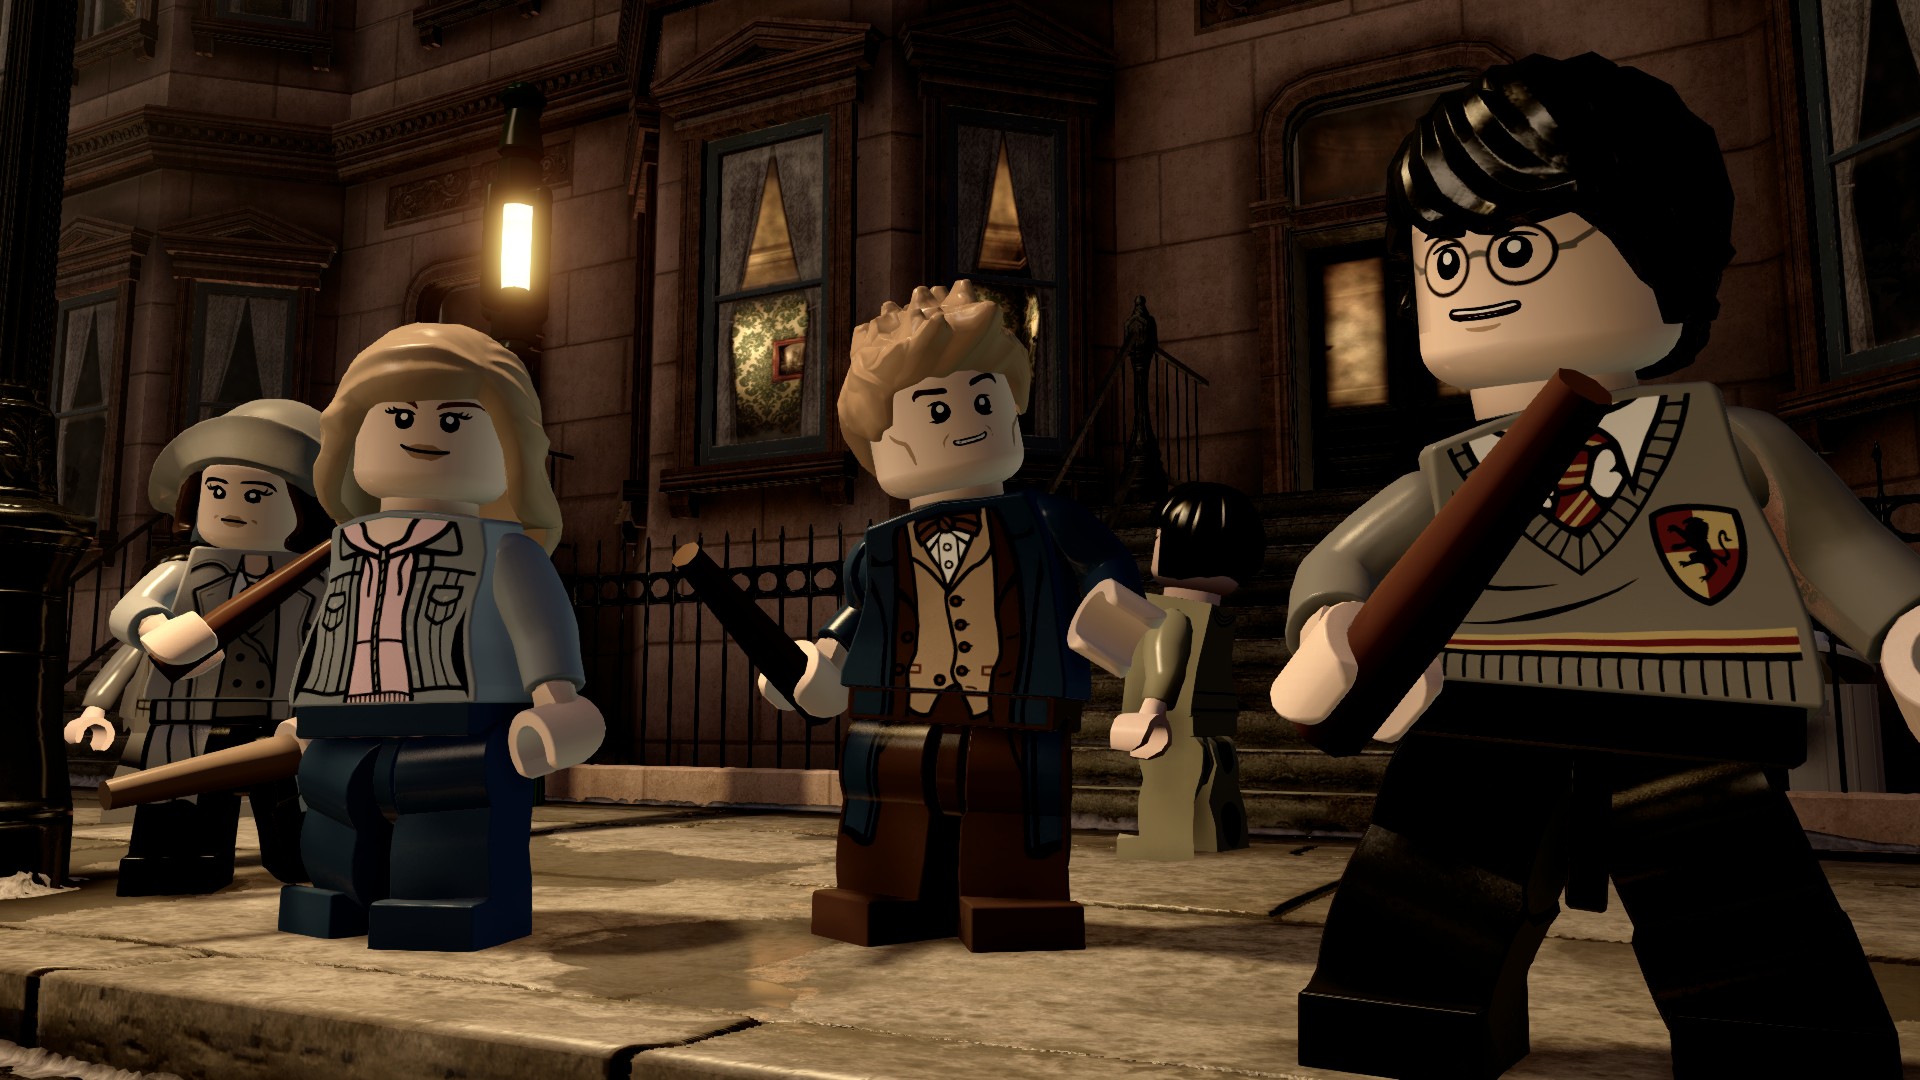 LEGO Dimensions Expansion Packs Based on The Goonies, Harry Potter, and LEGO City – DisKingdom.com